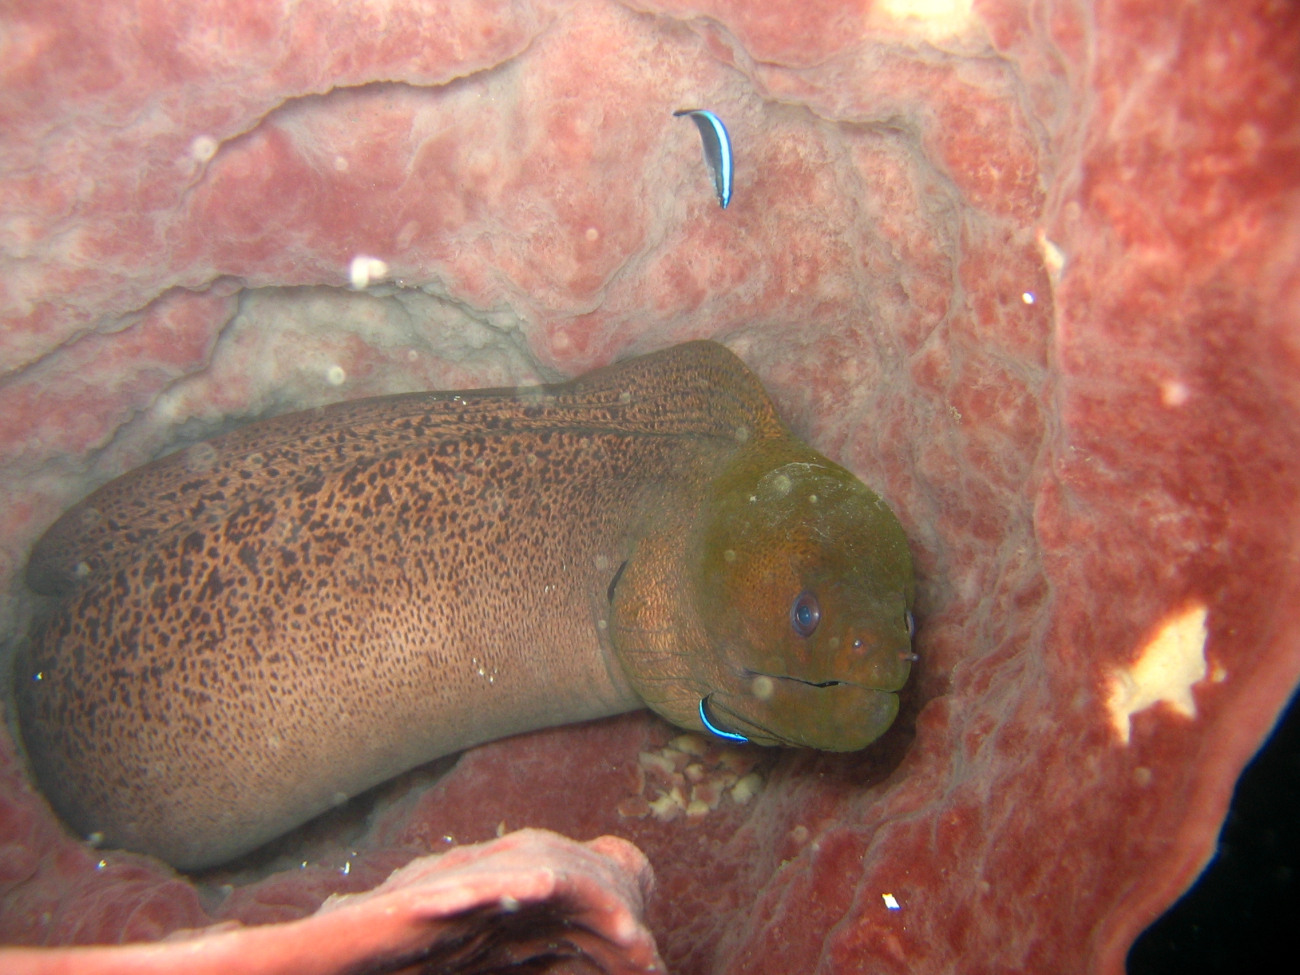 Giant moray eel with cleaner wrasses in red barrel sponge